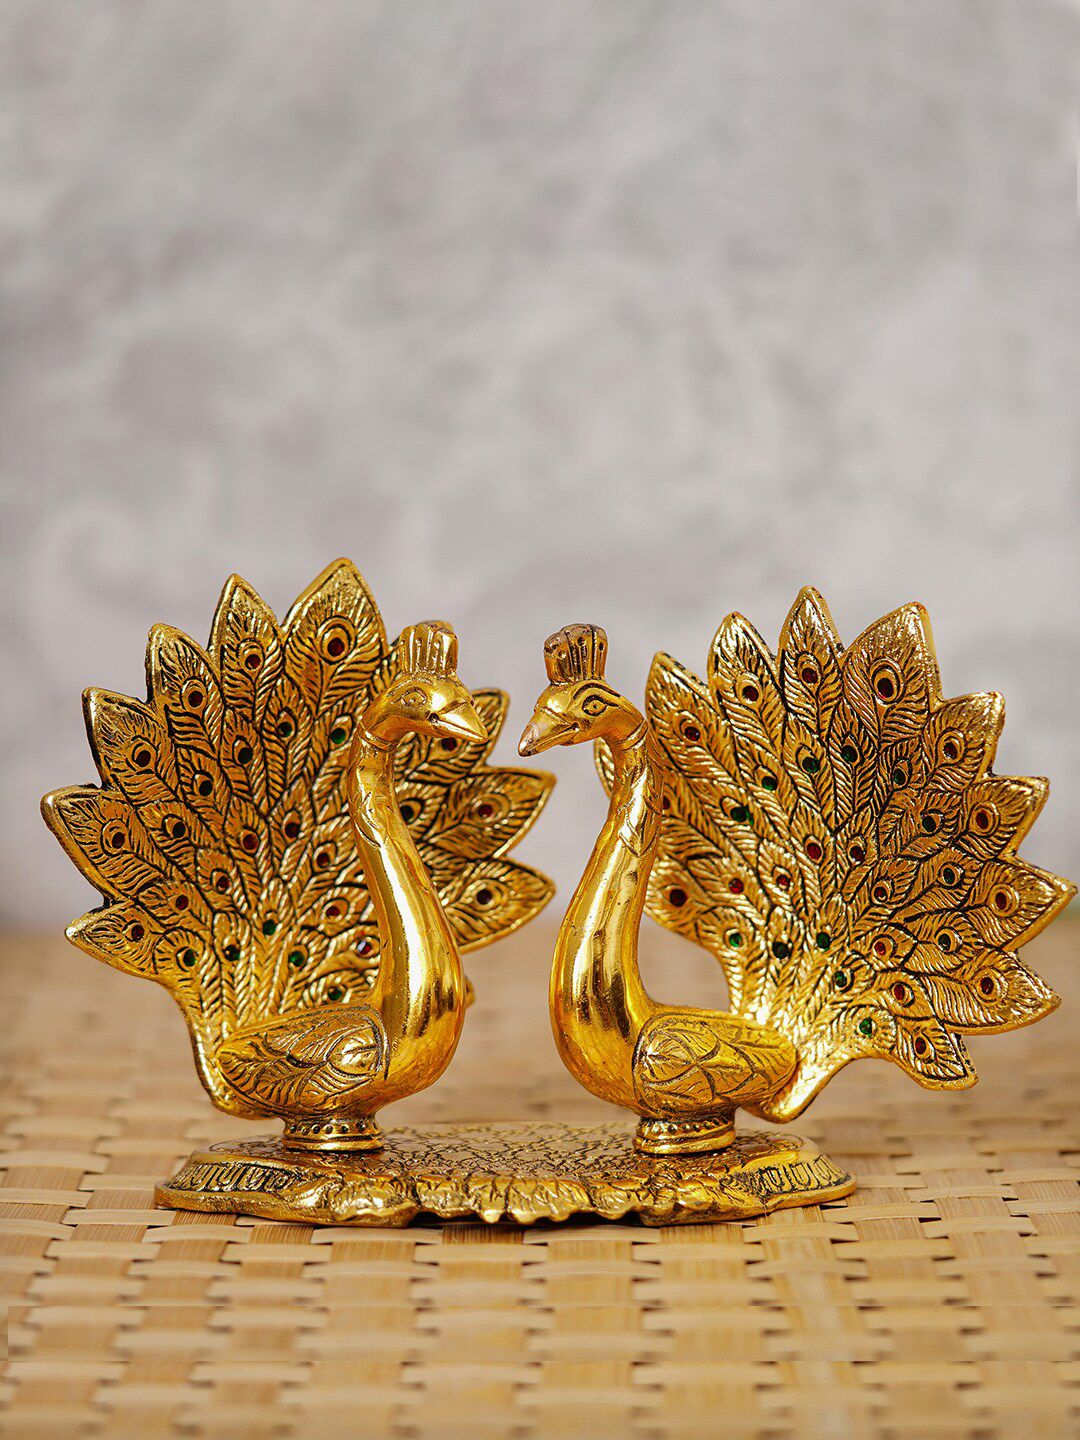 eCraftIndia Gold-Toned Loving Swan With Feather Couple Decorative Metal Figurine Showpiece Price in India